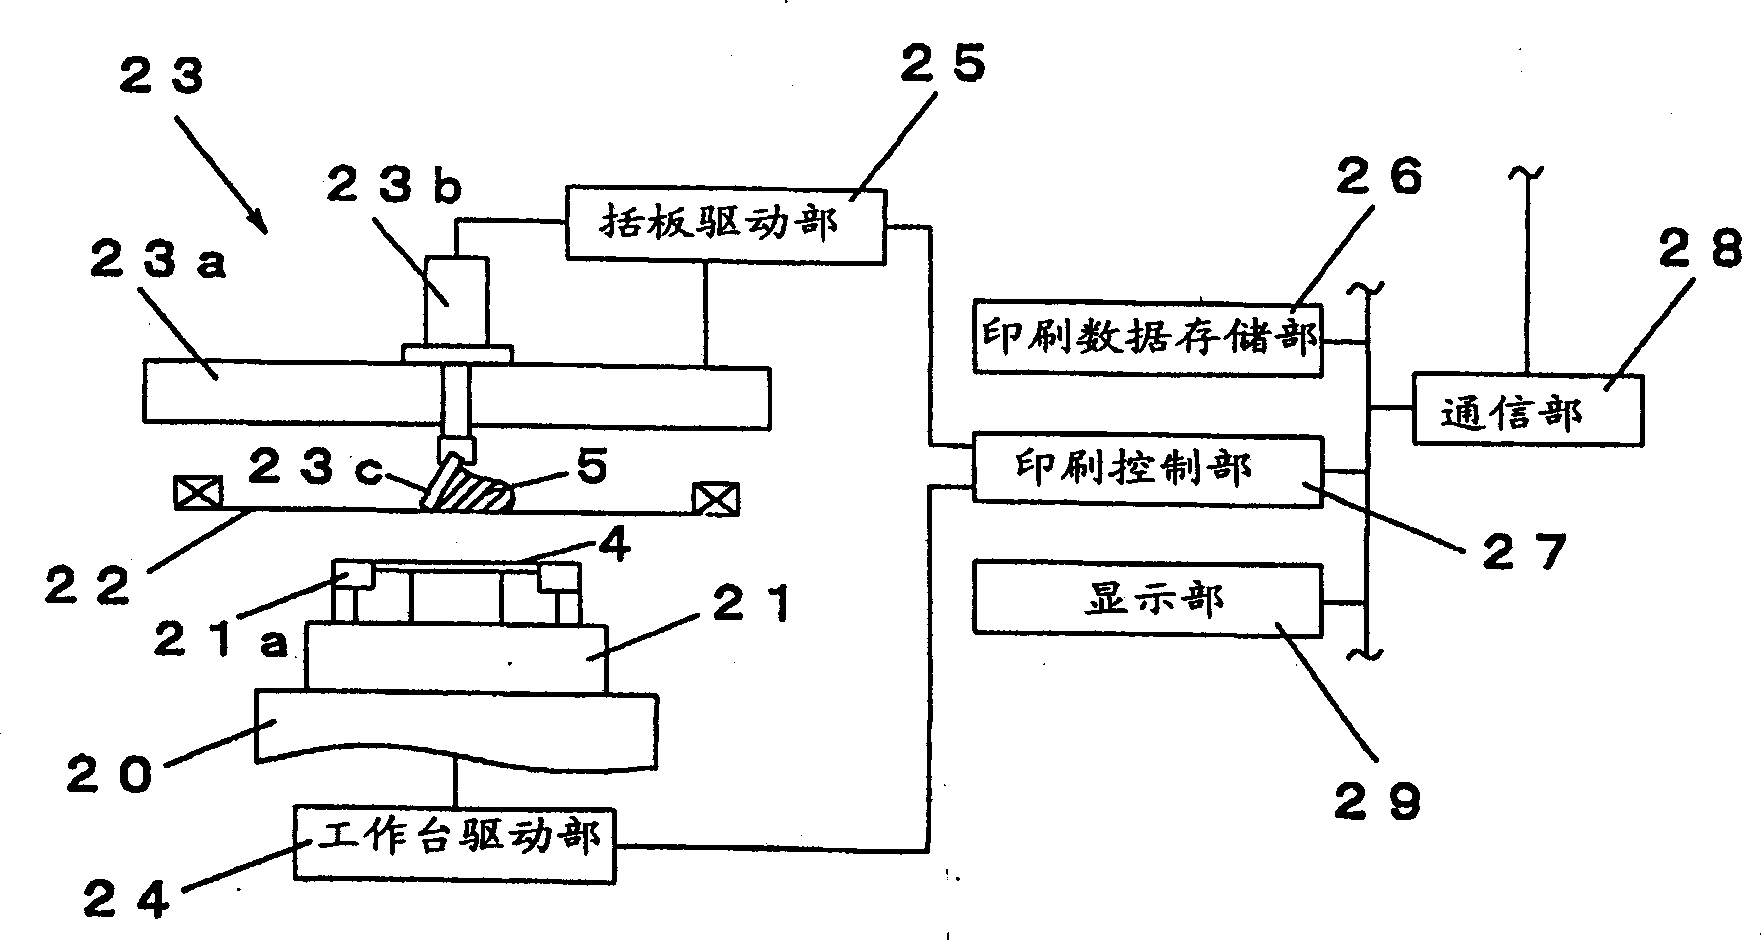 Element mounting system and mounting method